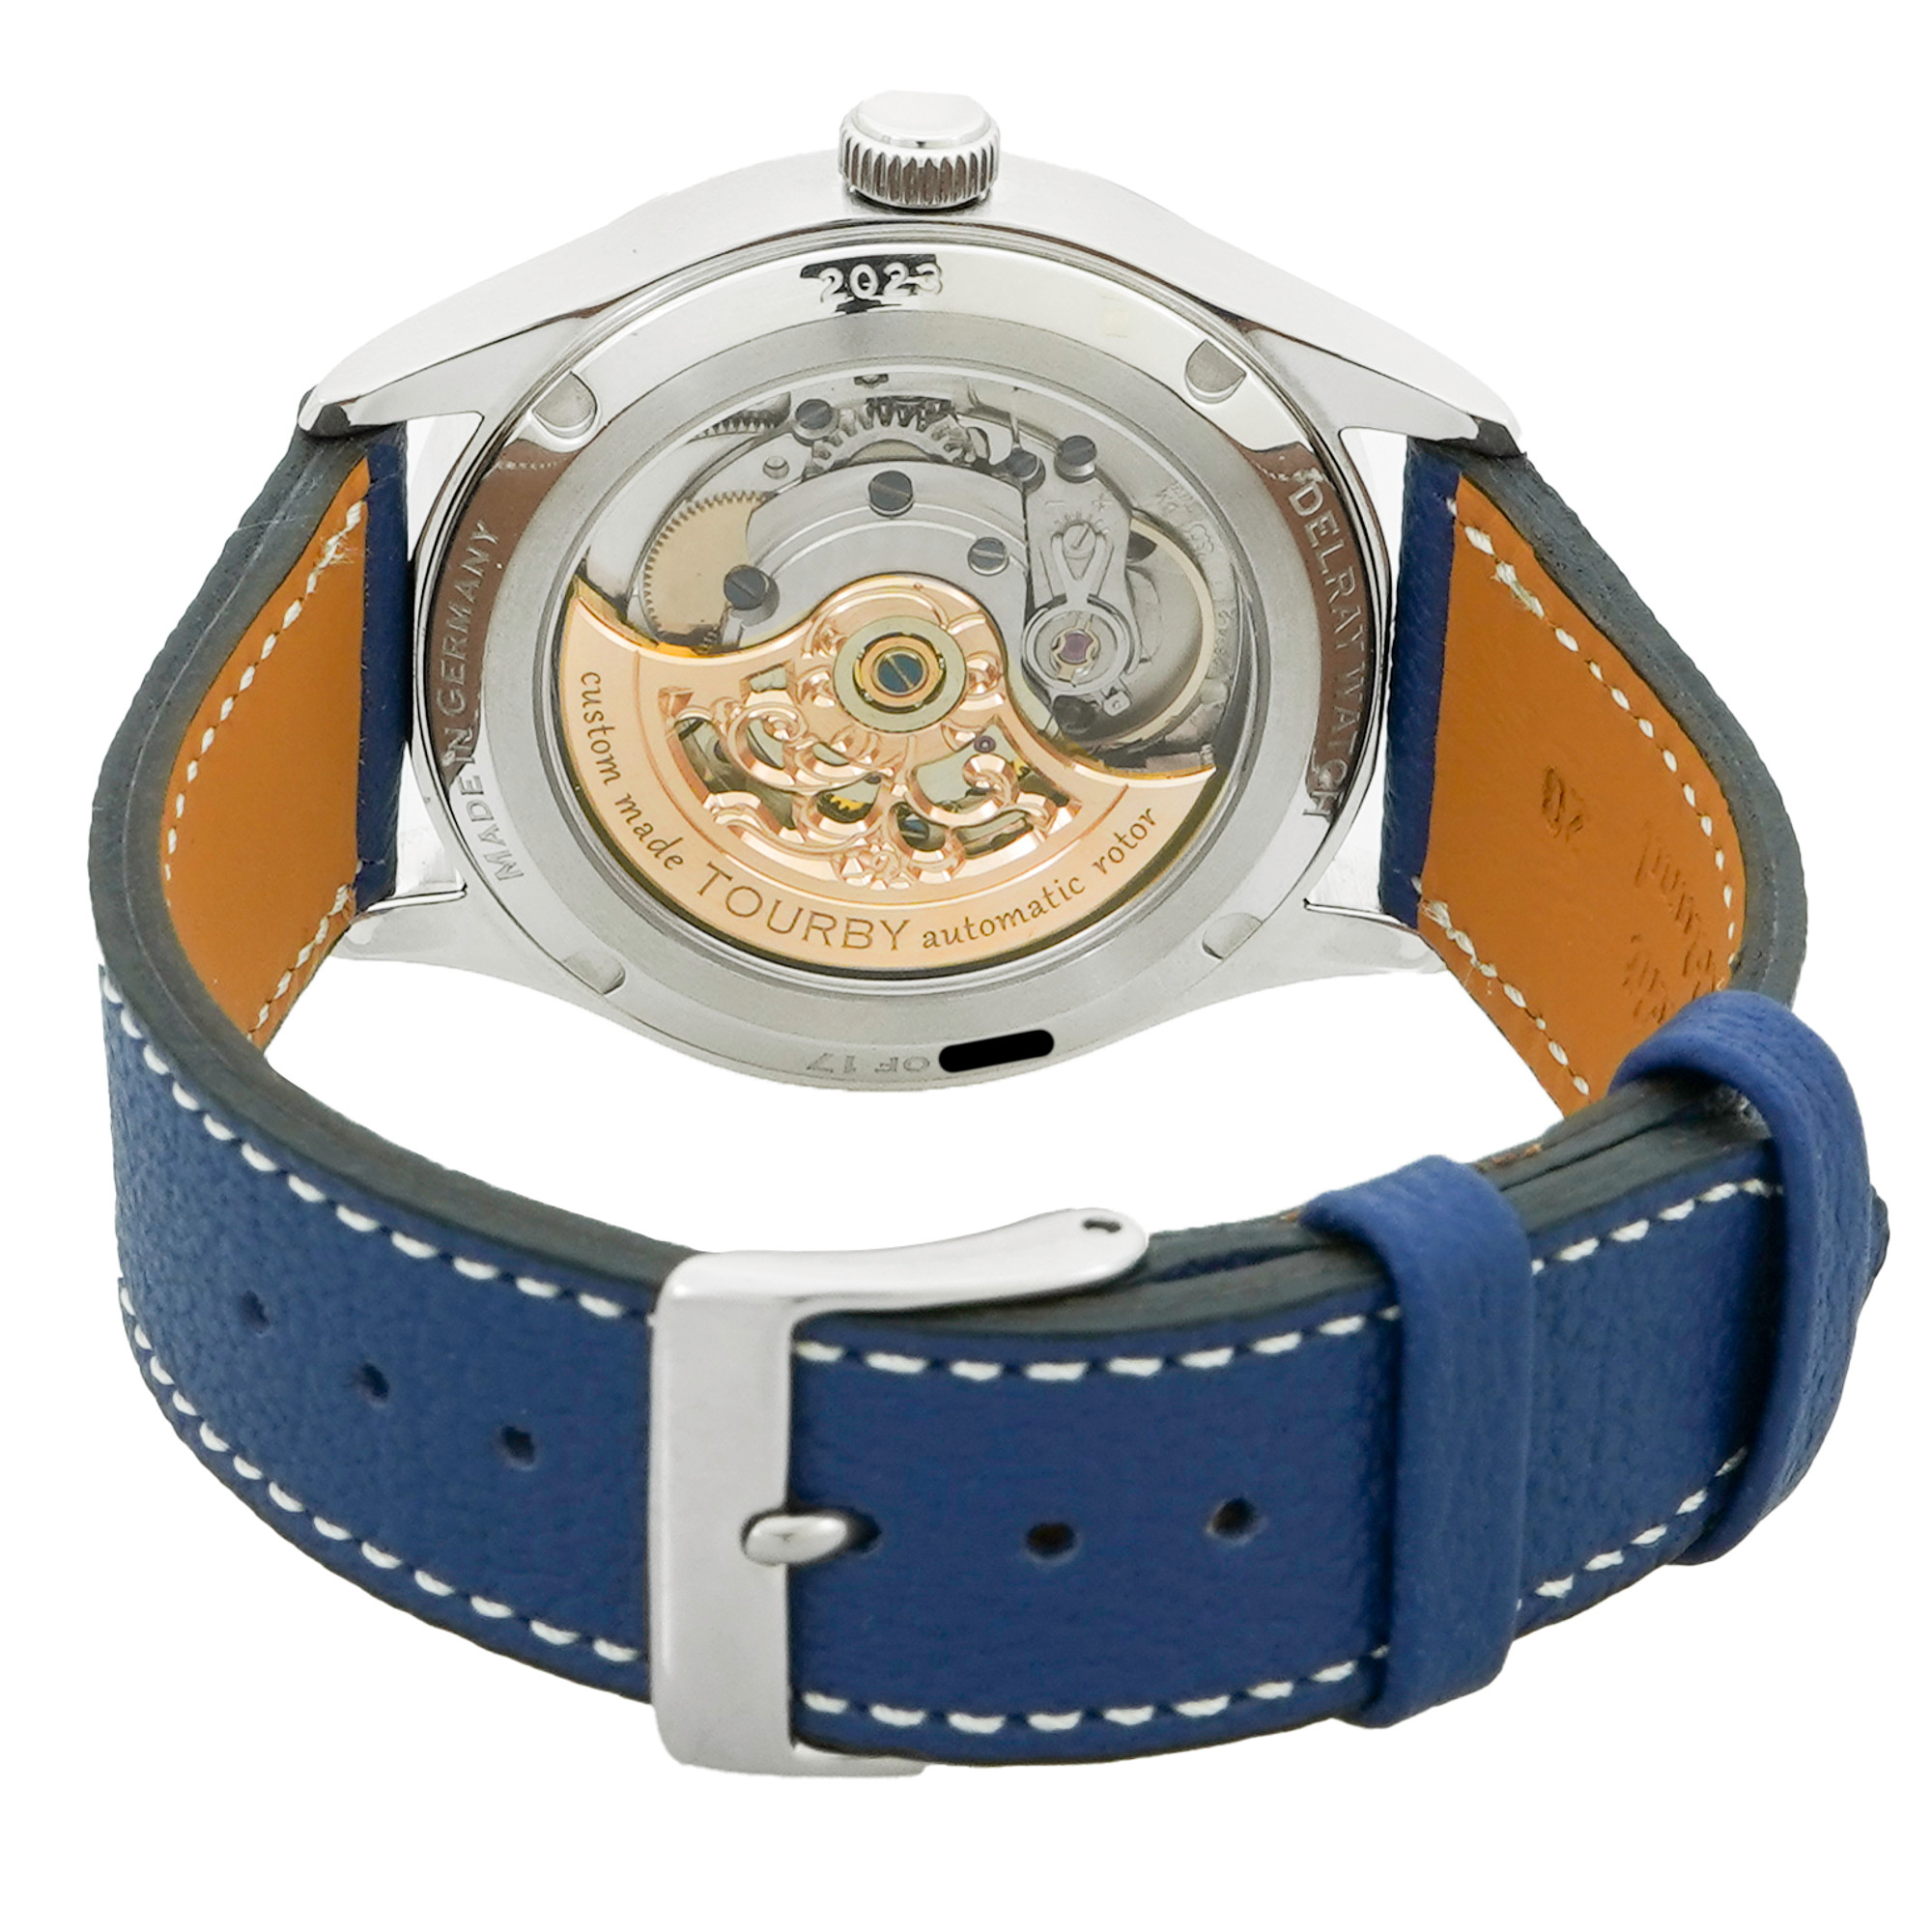 Tourby X Delray Watch Limited Edition Aventurine Dial - Inventory 4296